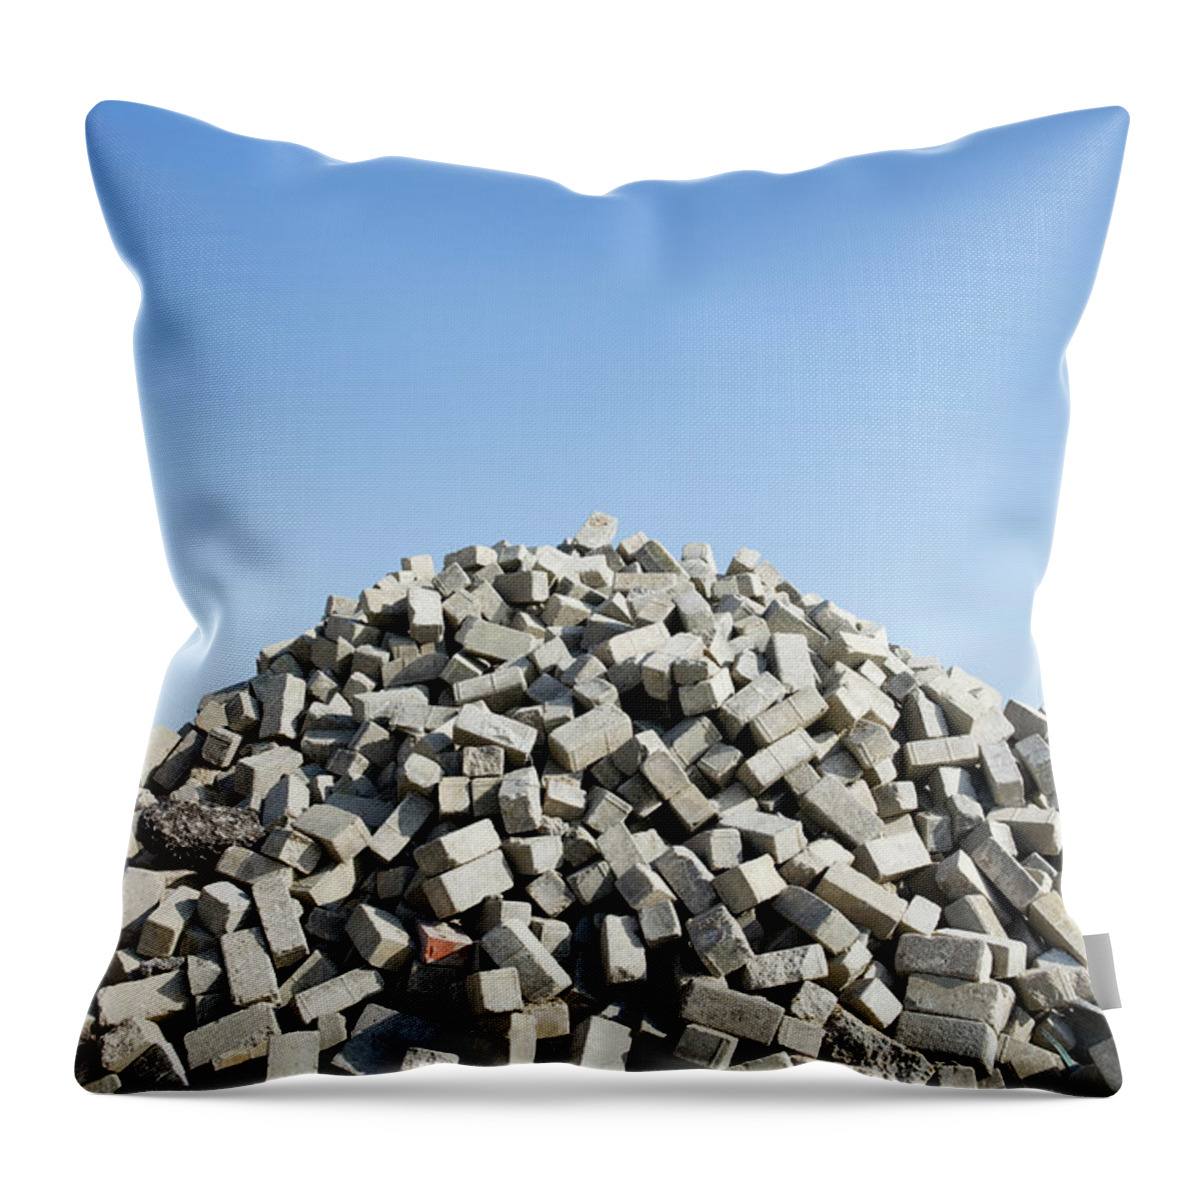 Heap Throw Pillow featuring the photograph Pile Of Bricks by James French